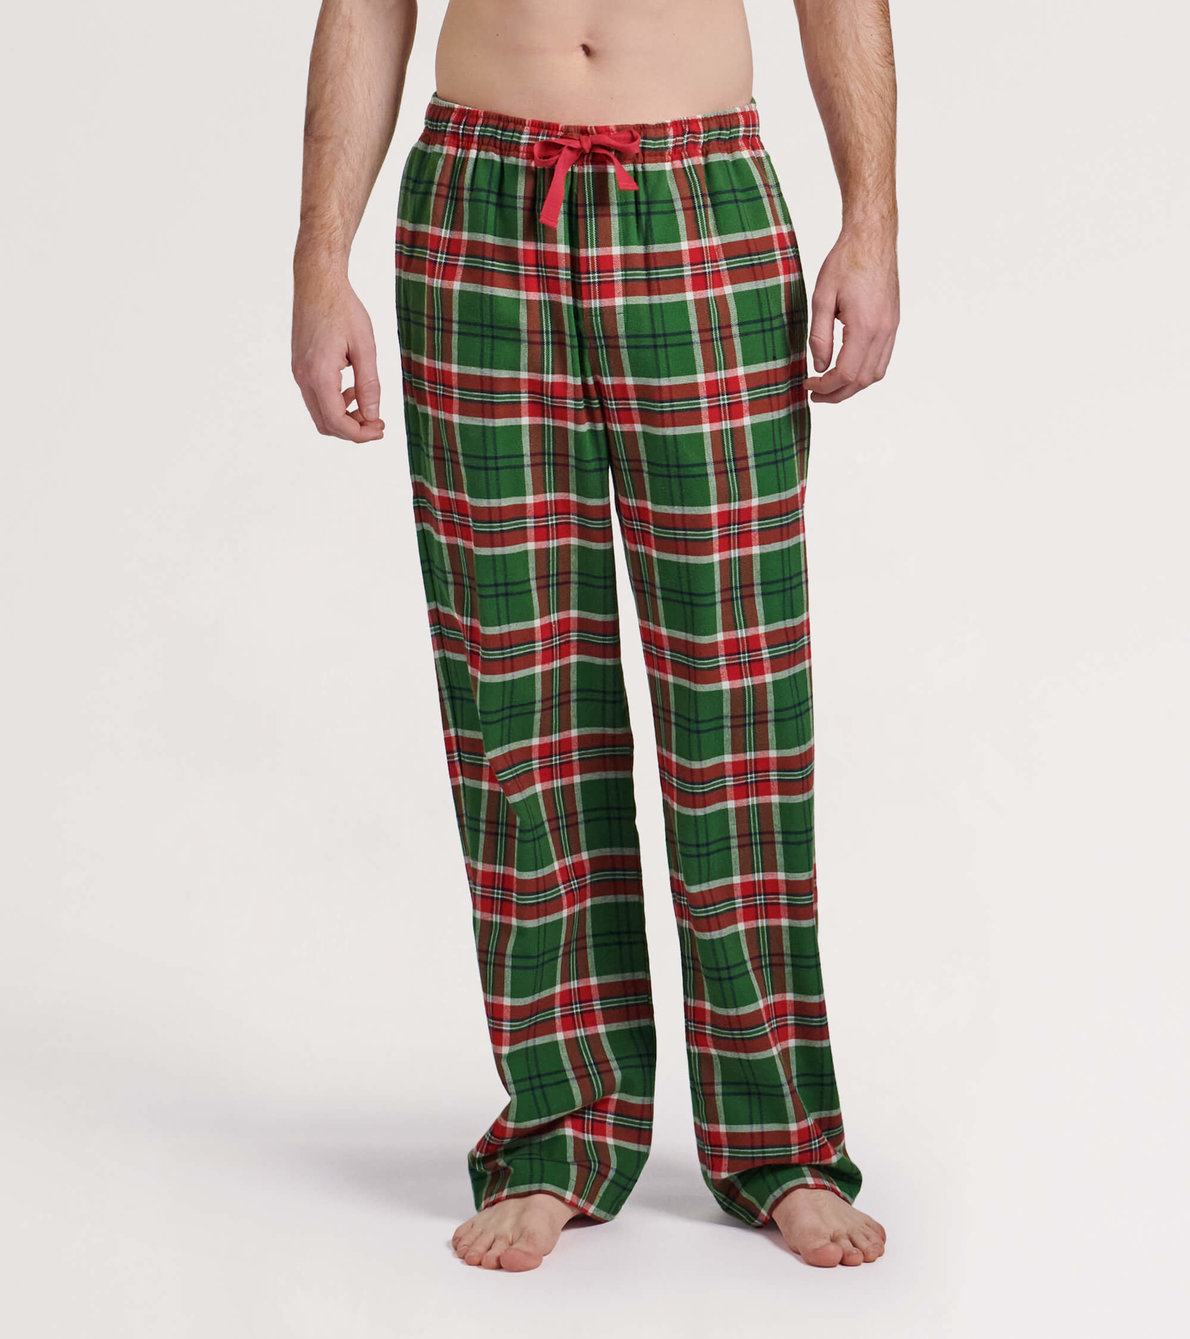 View larger image of Men's Country Christmas Plaid Flannel Pajama Pants